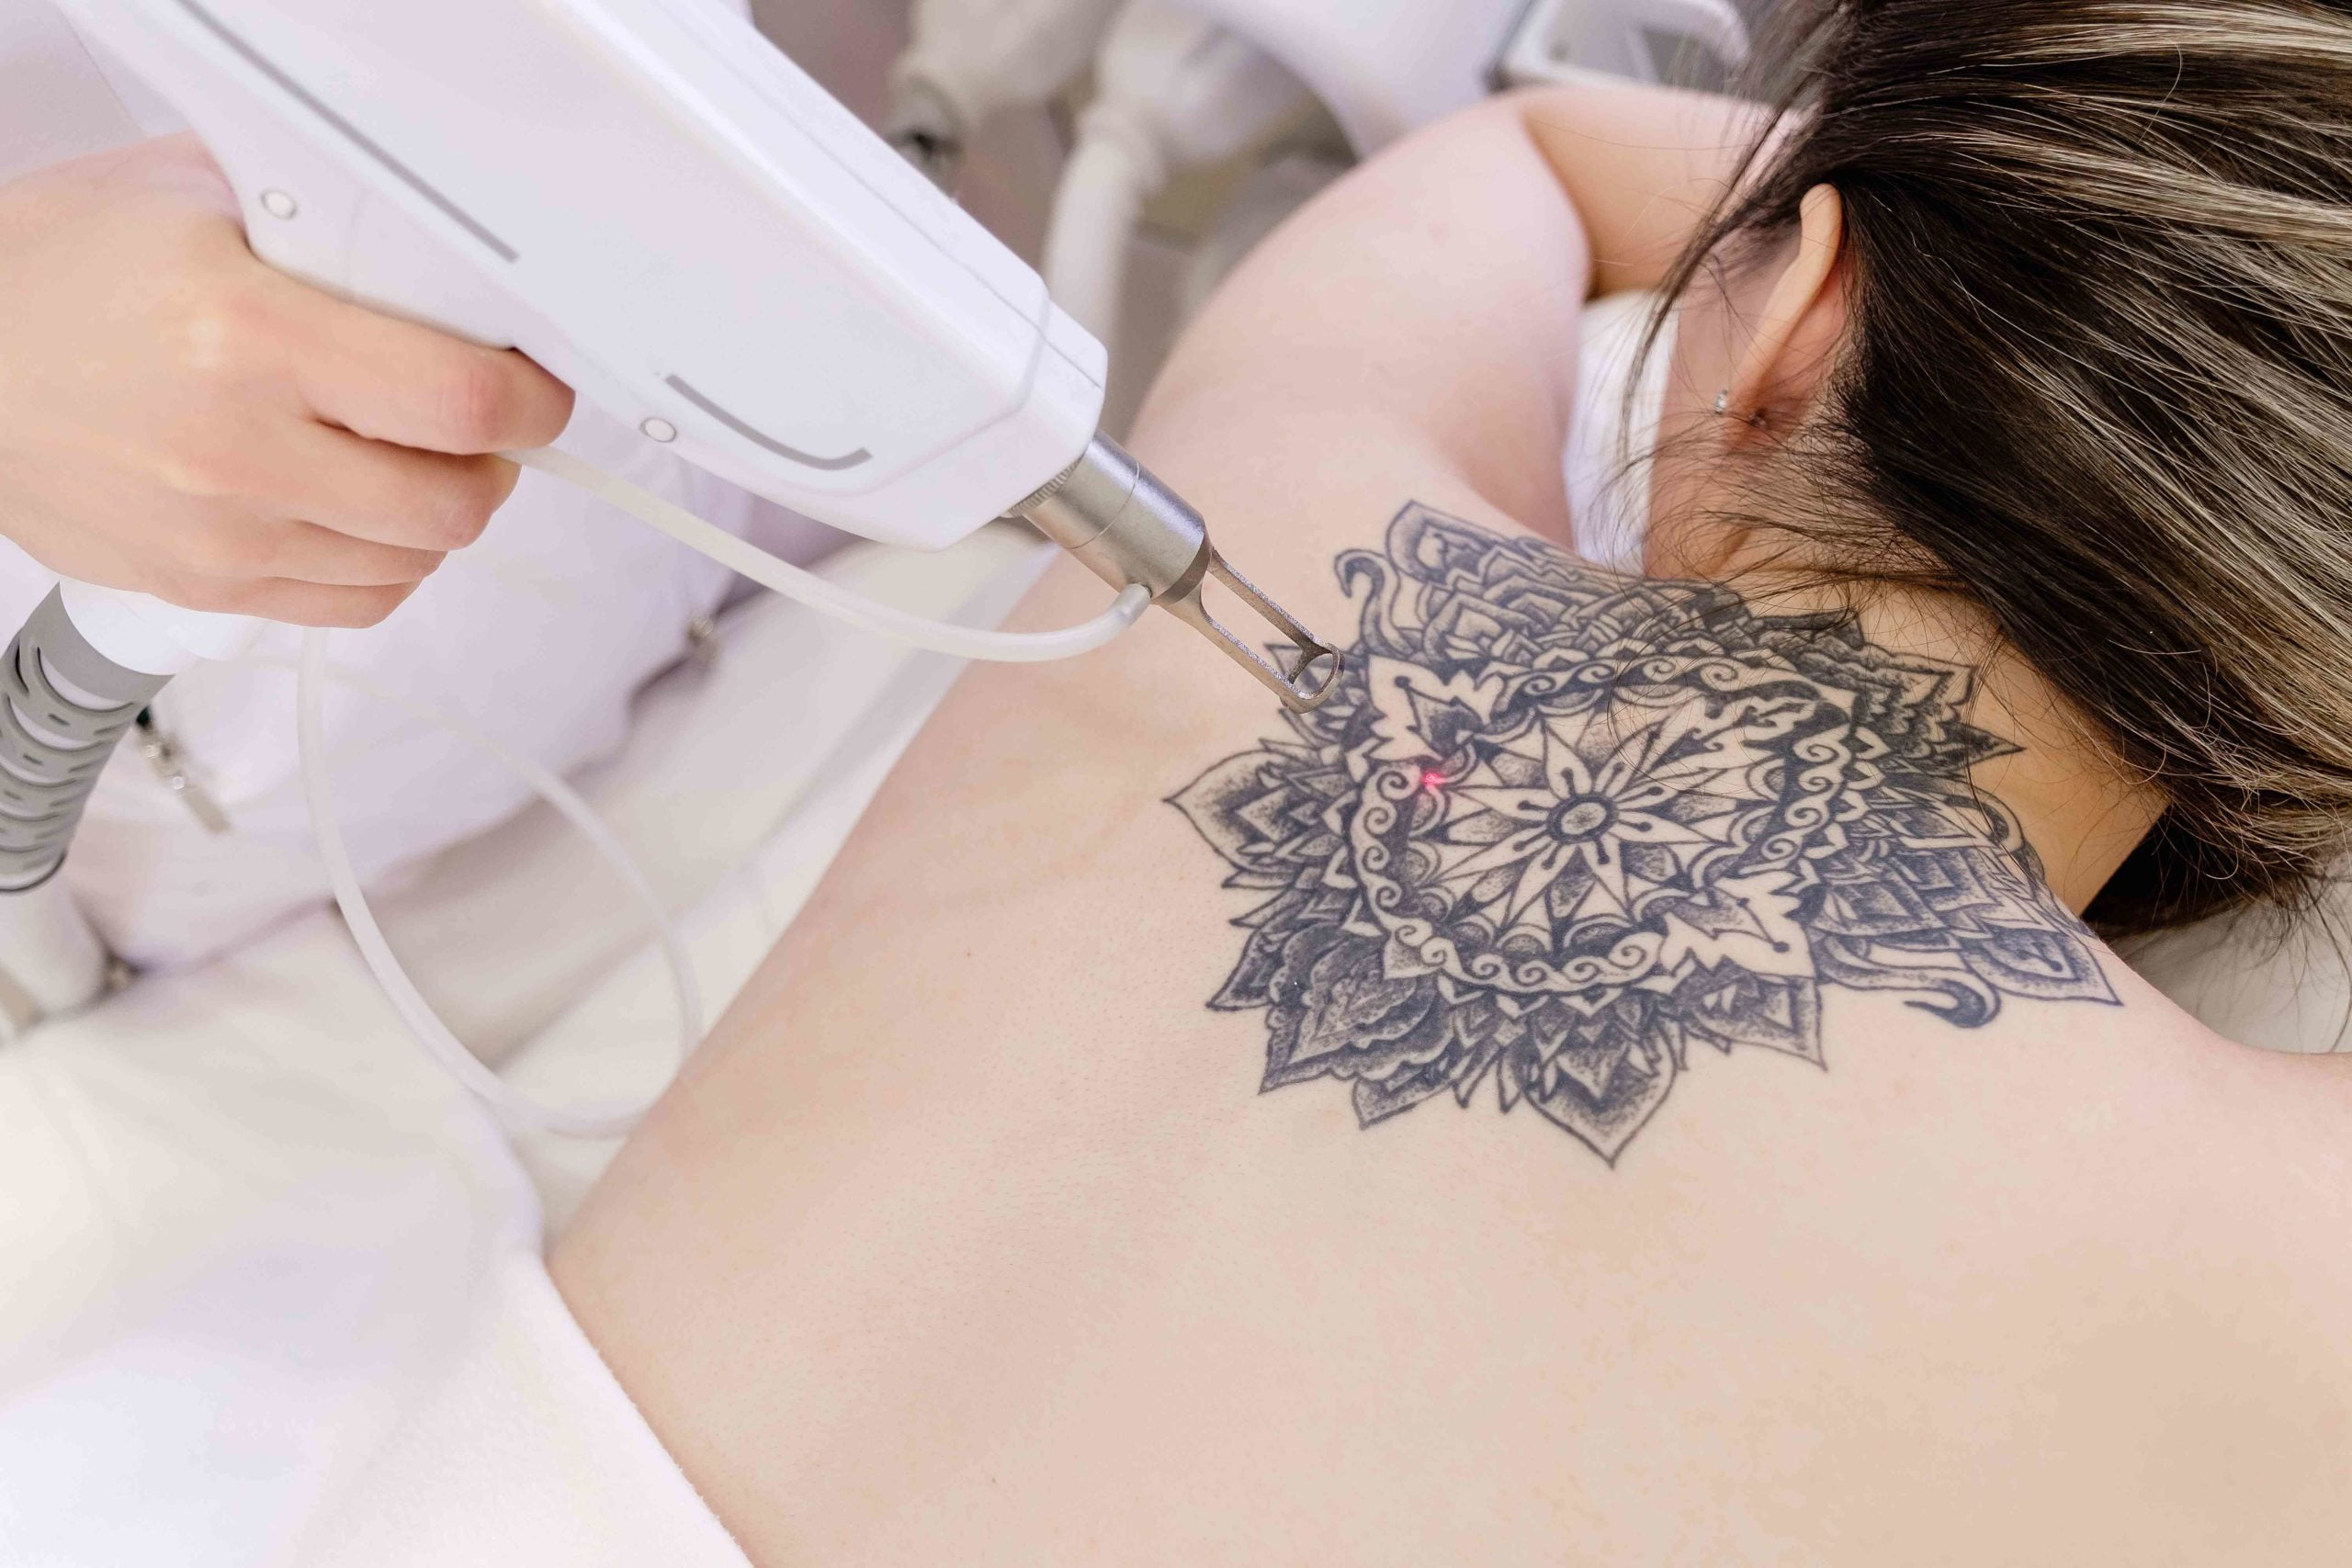 Woman Taking Tattoo Removal Treatment | CMA Primary Care & MedSpa in Windsor & Hartford, CT